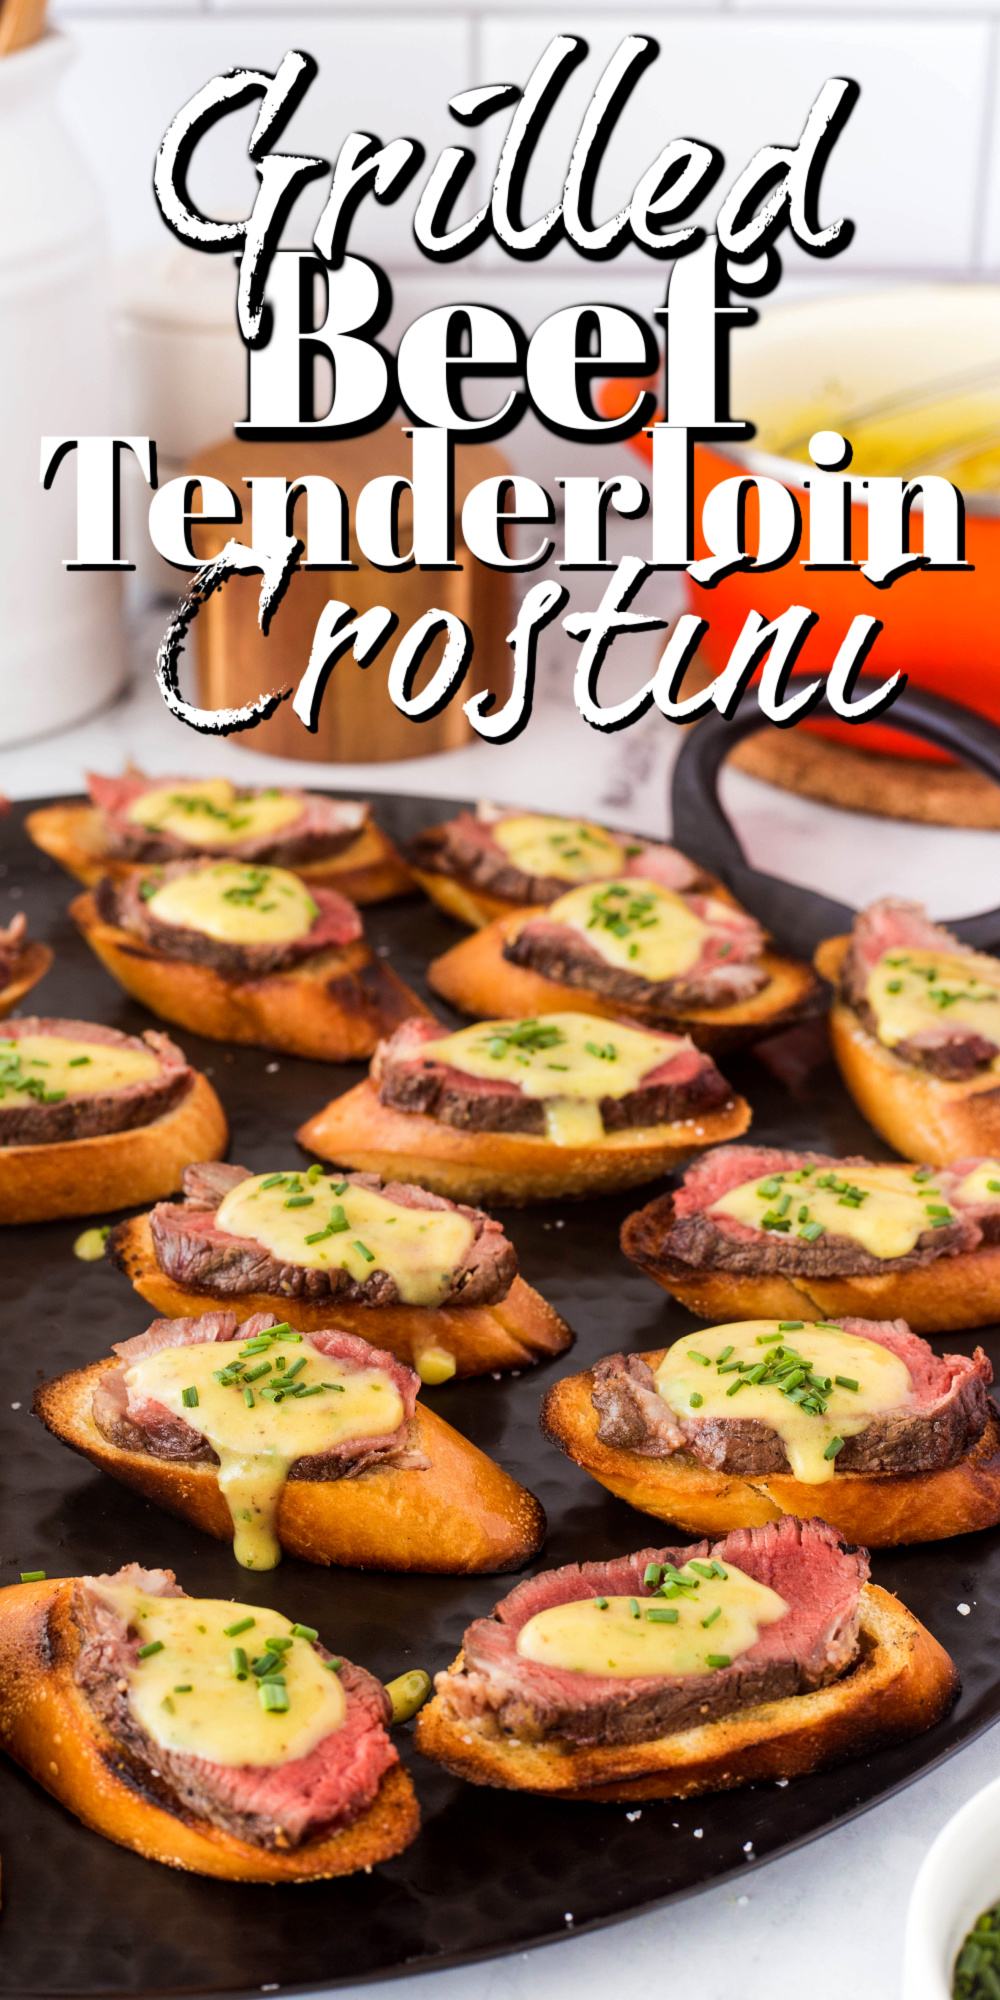 These tenderloin beef crostini appetizers are simply amazing. They will be the hit of your next get-together!